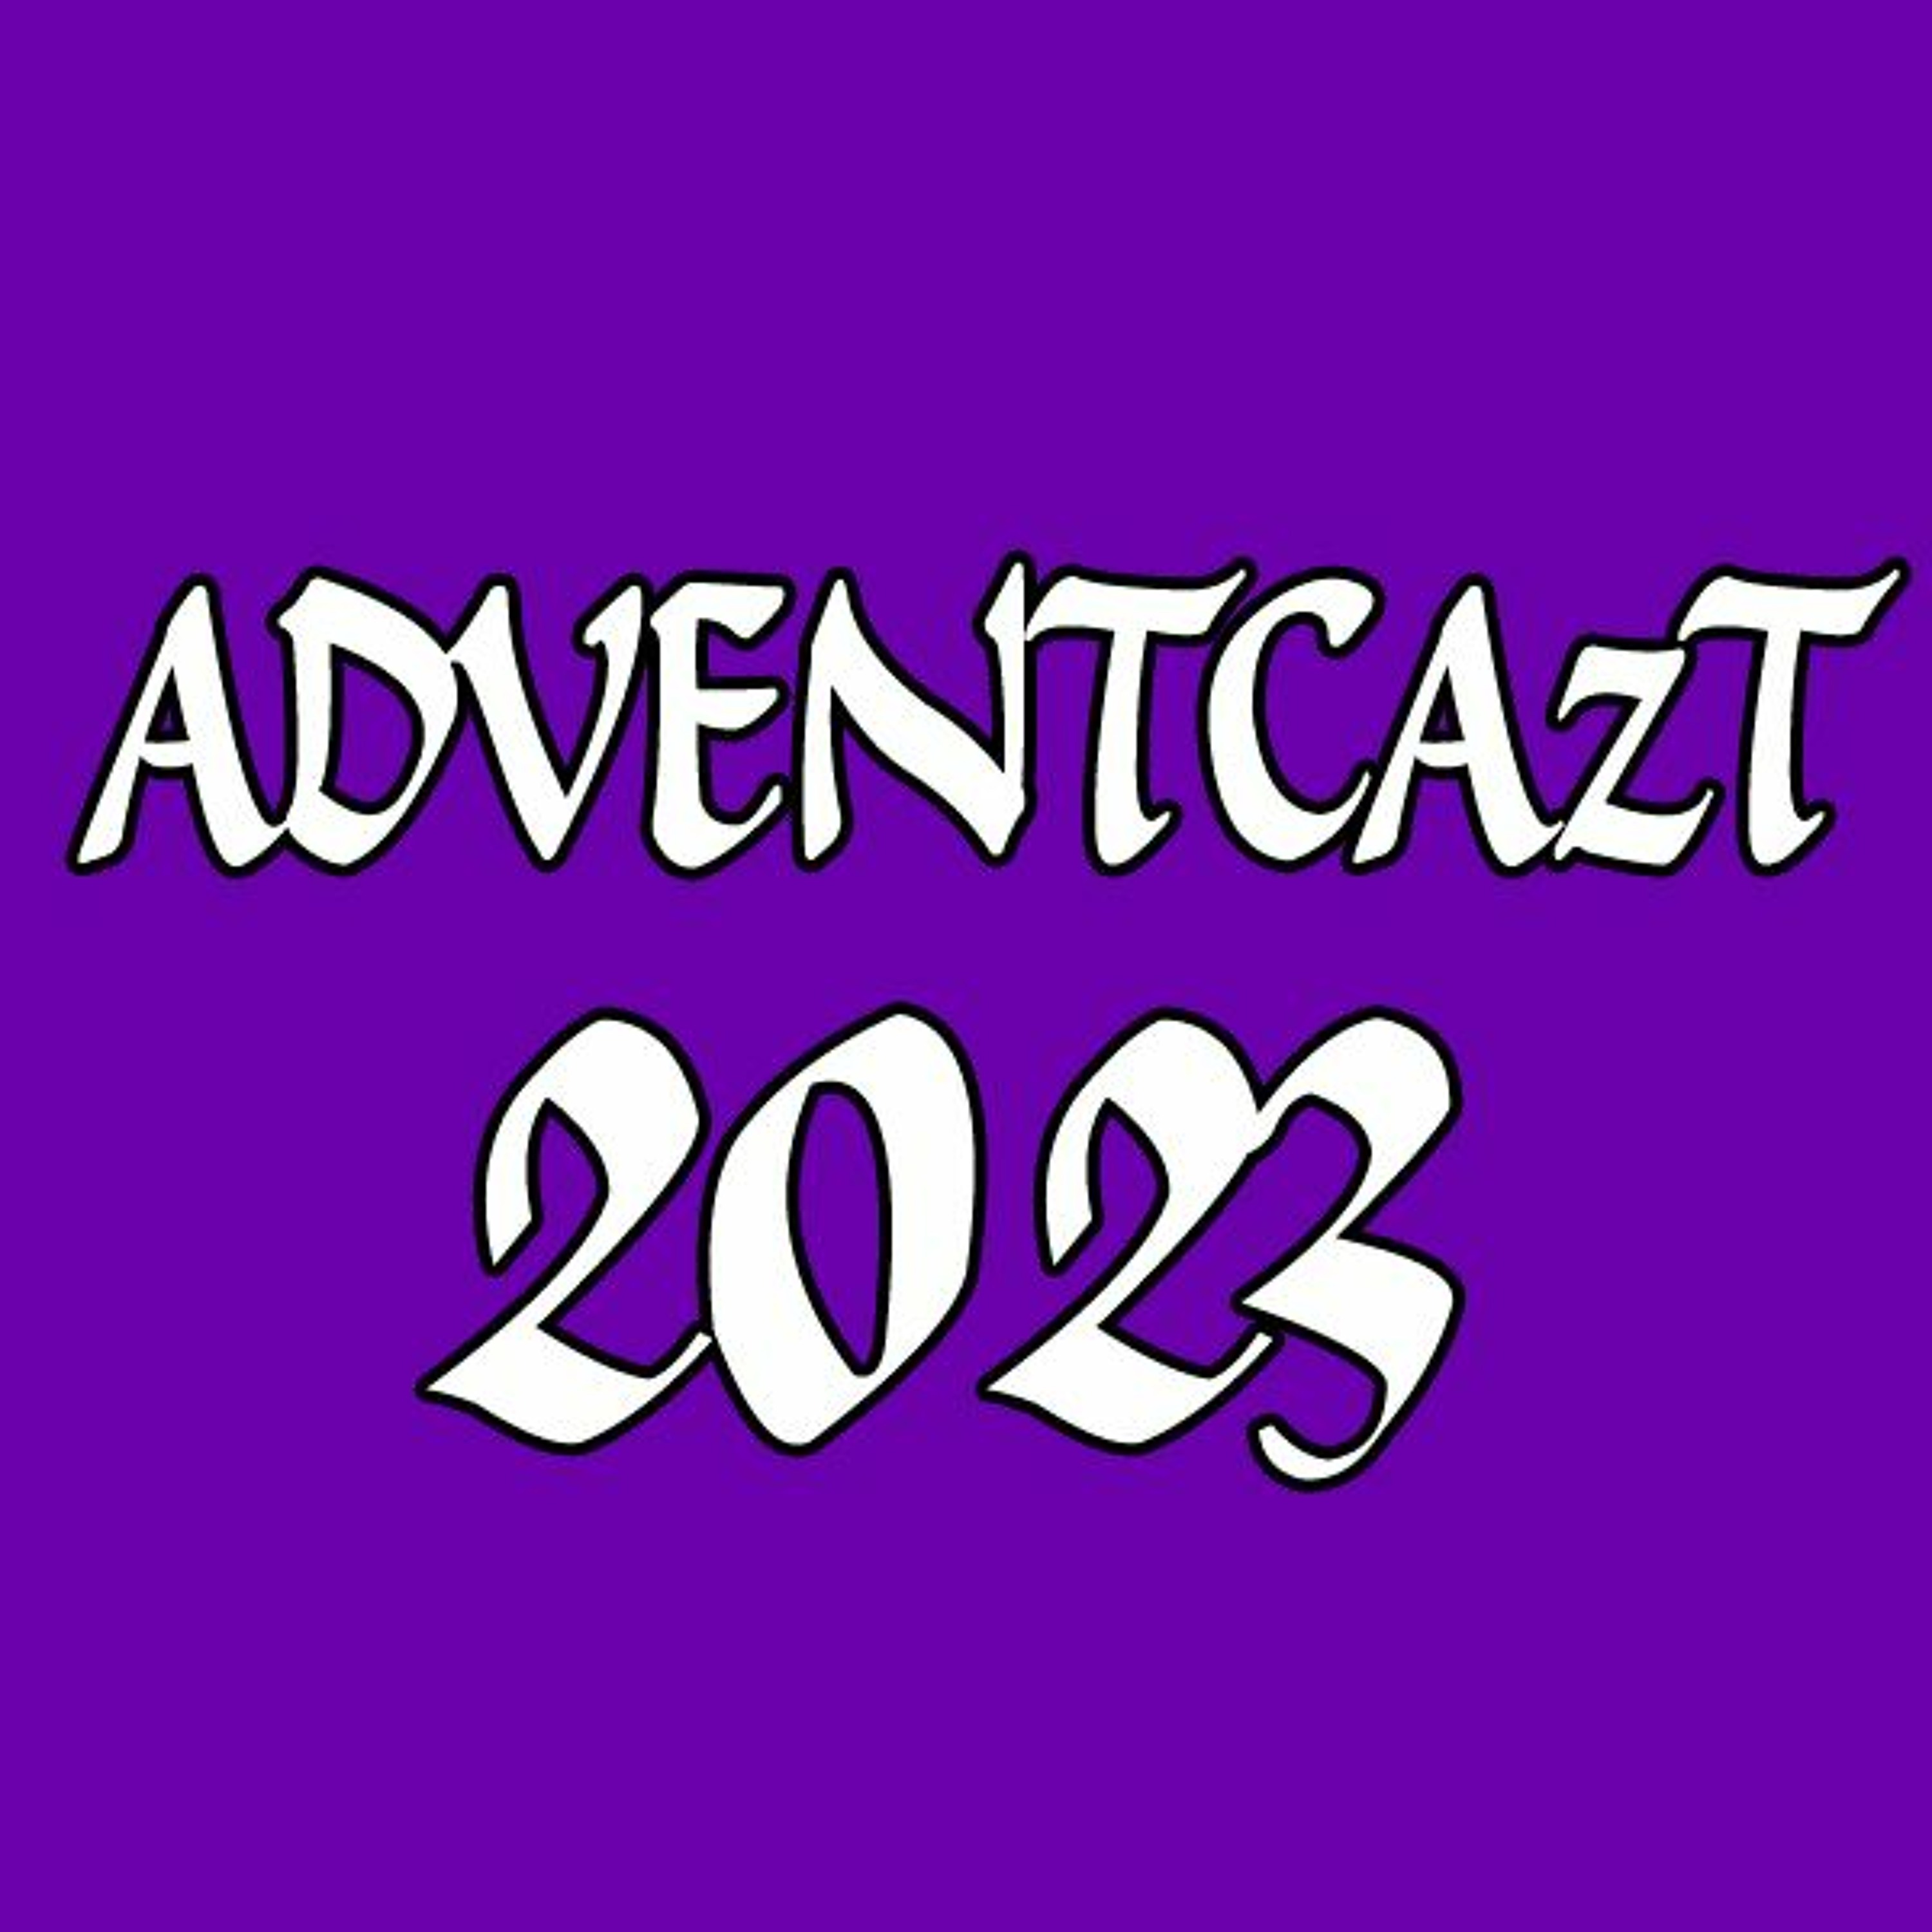 ADVENTCAzT 2023 – 15 – Gaudete Sunday 3rd of Advent: We are our rites!